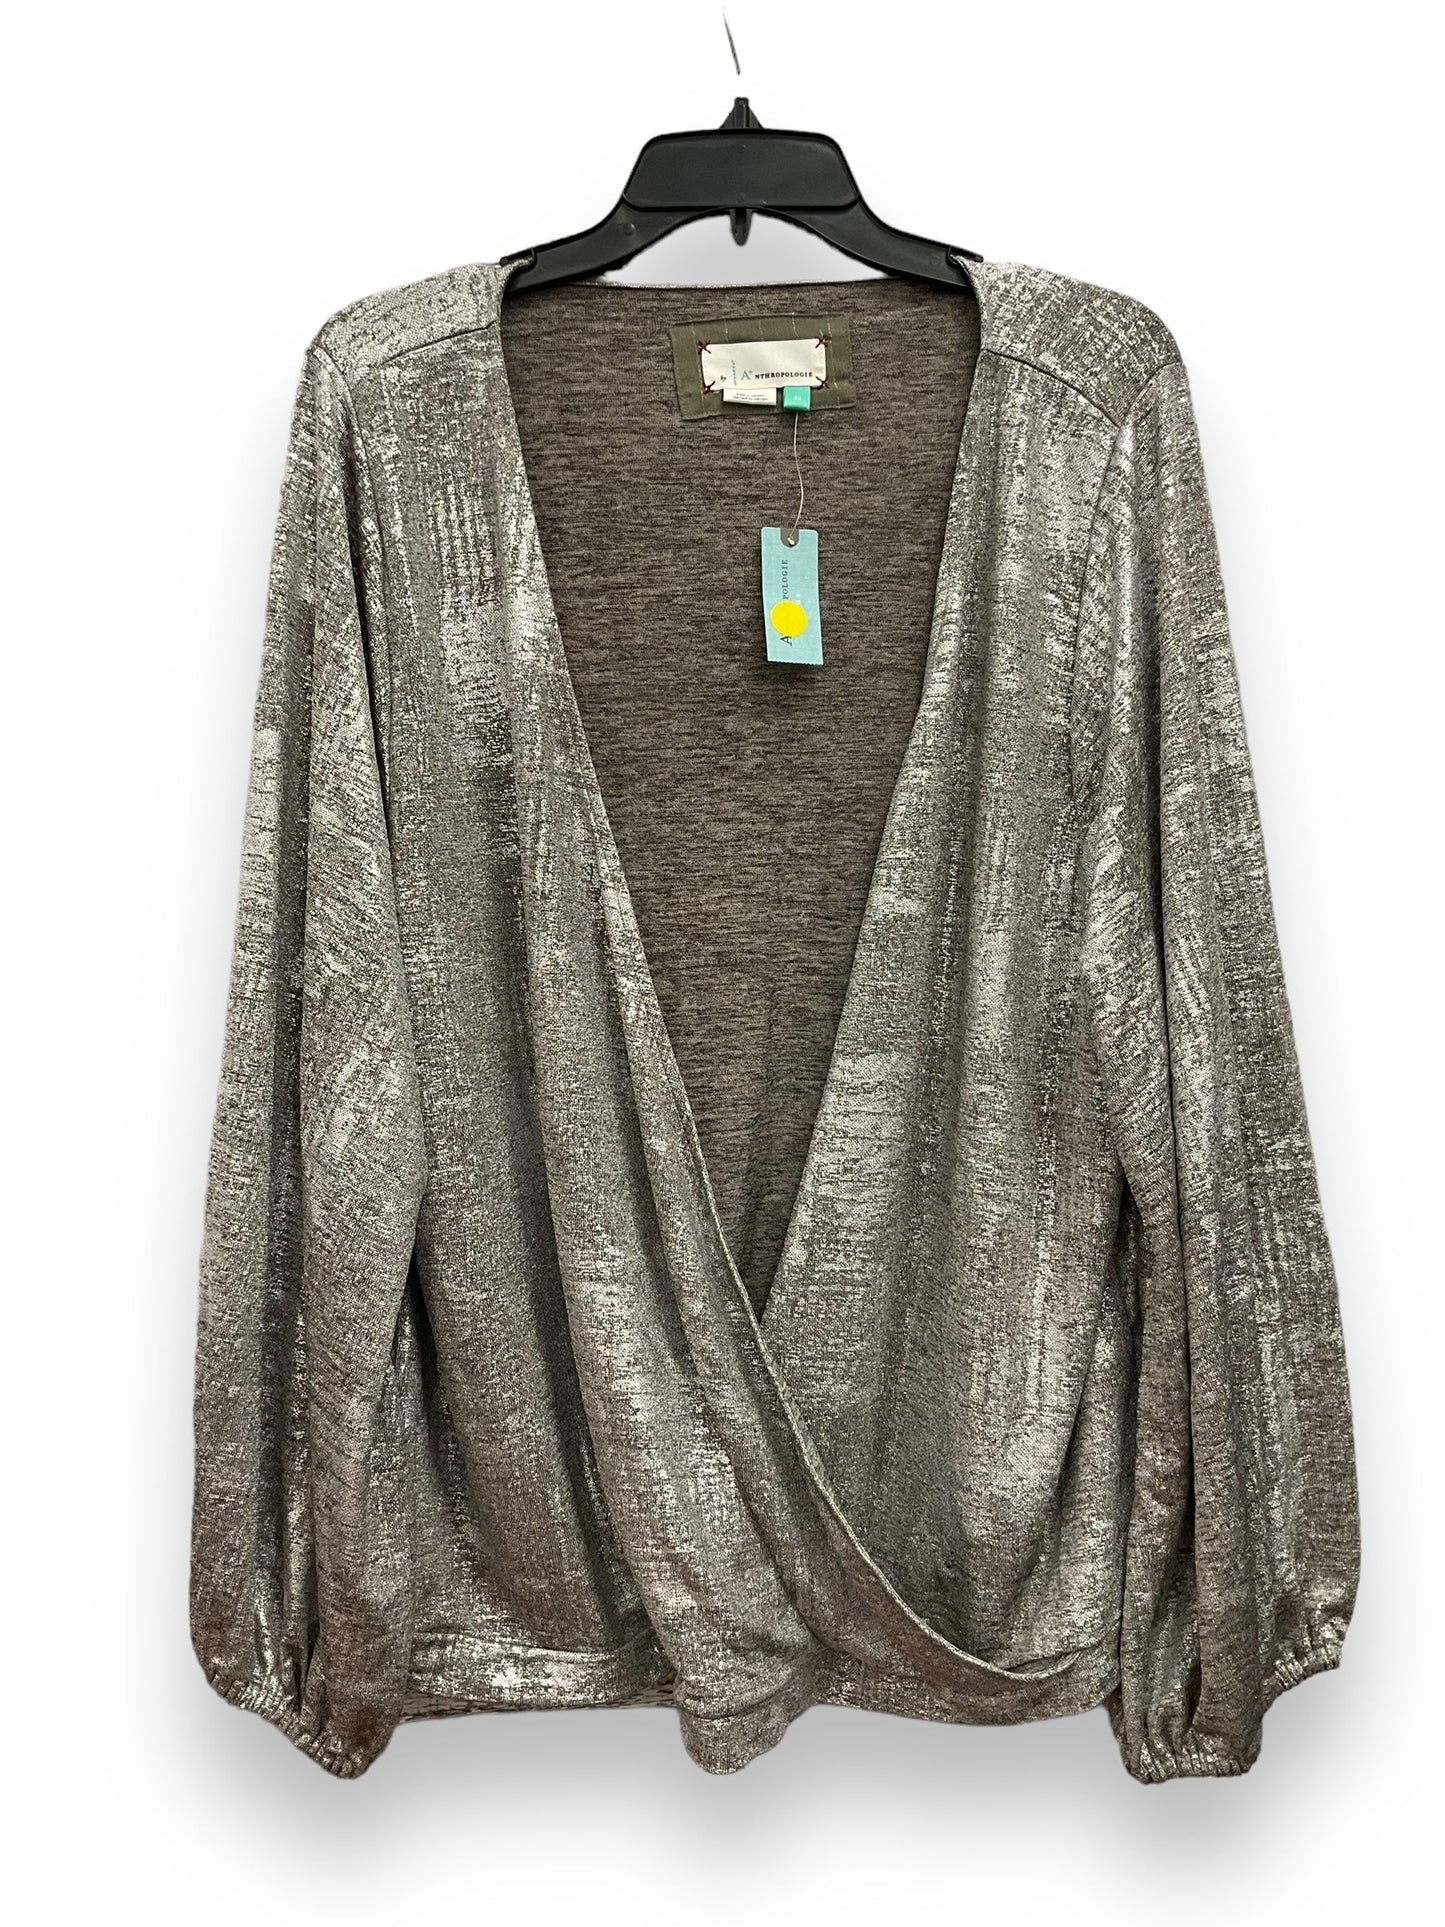 Silver Top 3/4 Sleeve Anthropologie, Size 2x